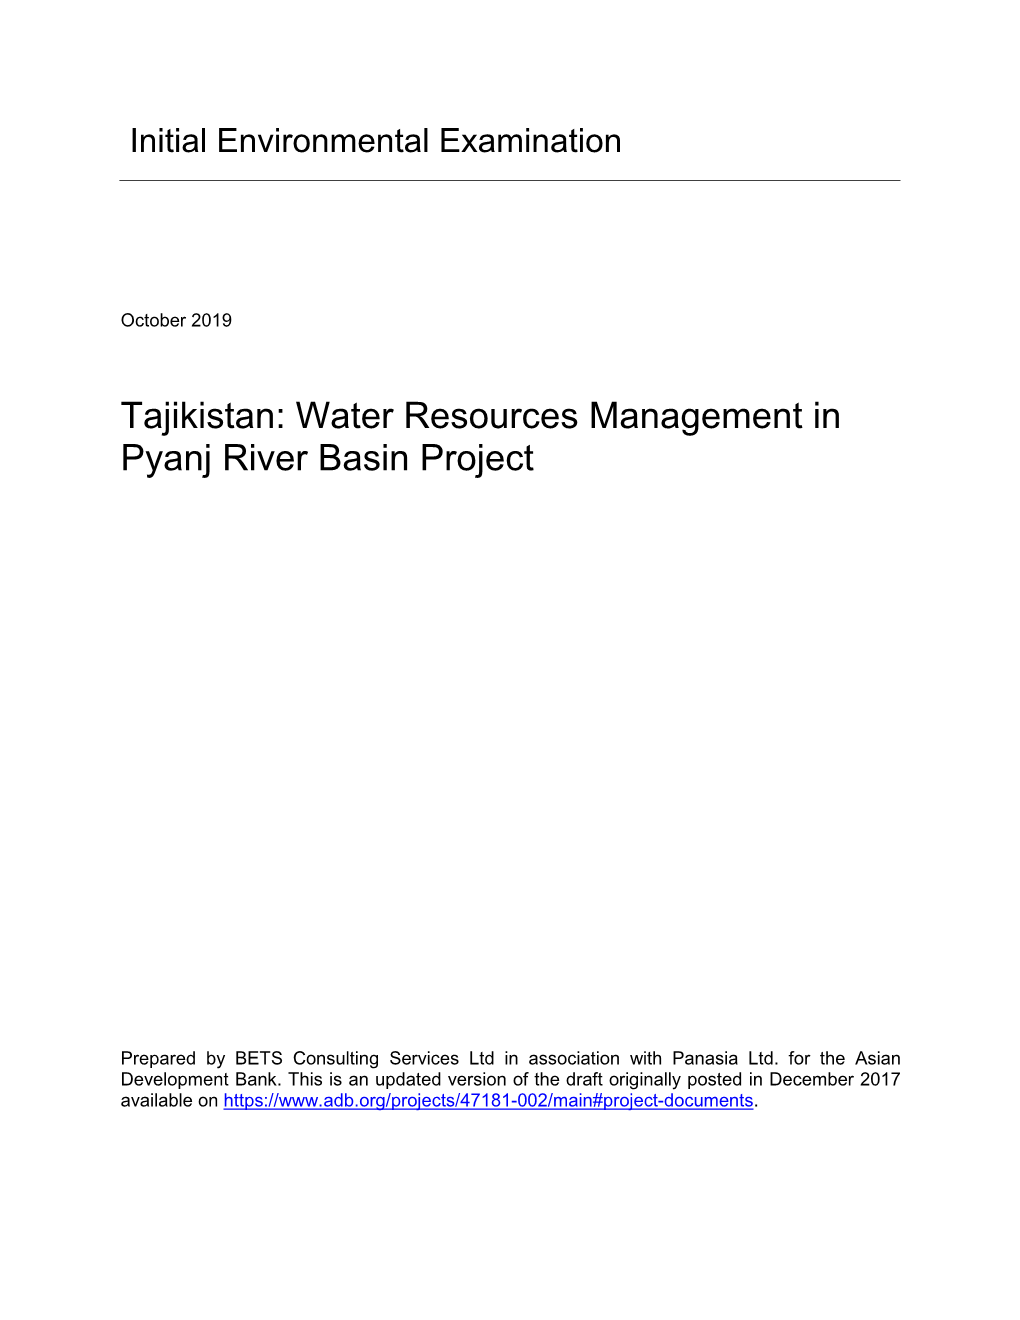 47181-002: Water Resources Management in Pyanj River Basin